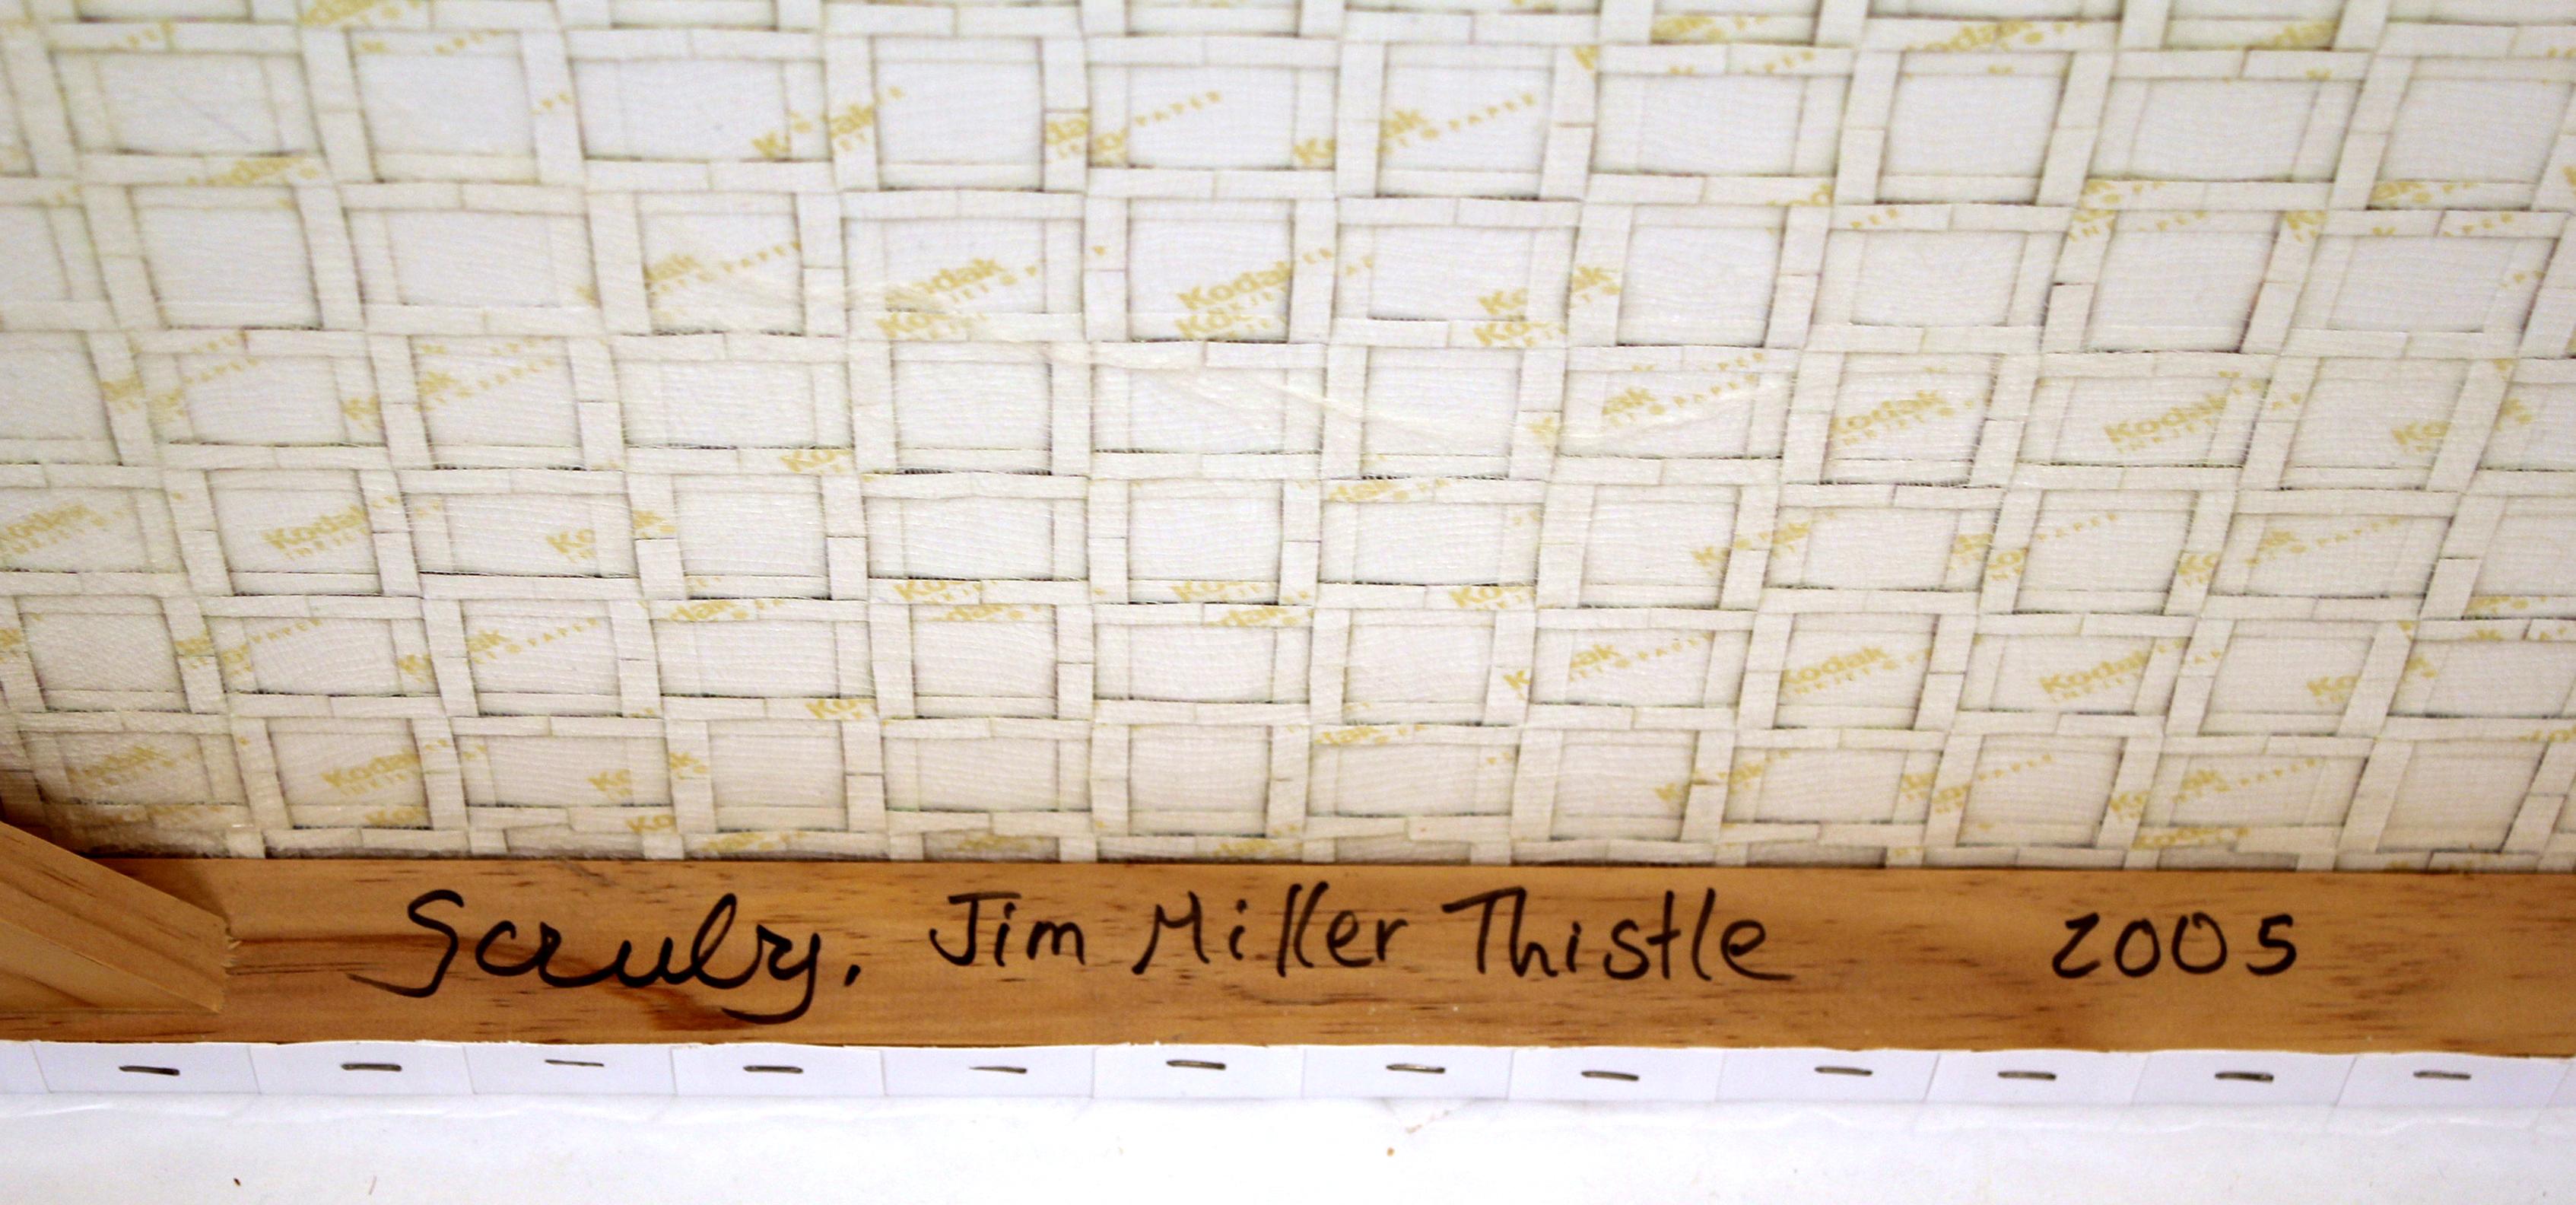 Rusty Scruby Photographic Reconstruction Titled Jim Miller Thistle, 2005 For Sale 2